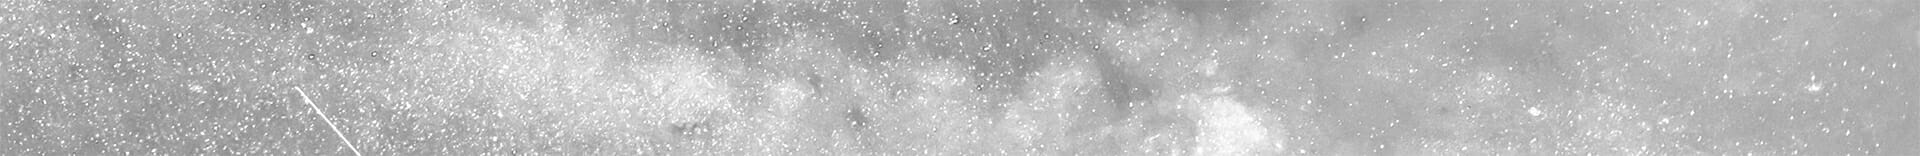 Image of a banner with white specks on a grey background